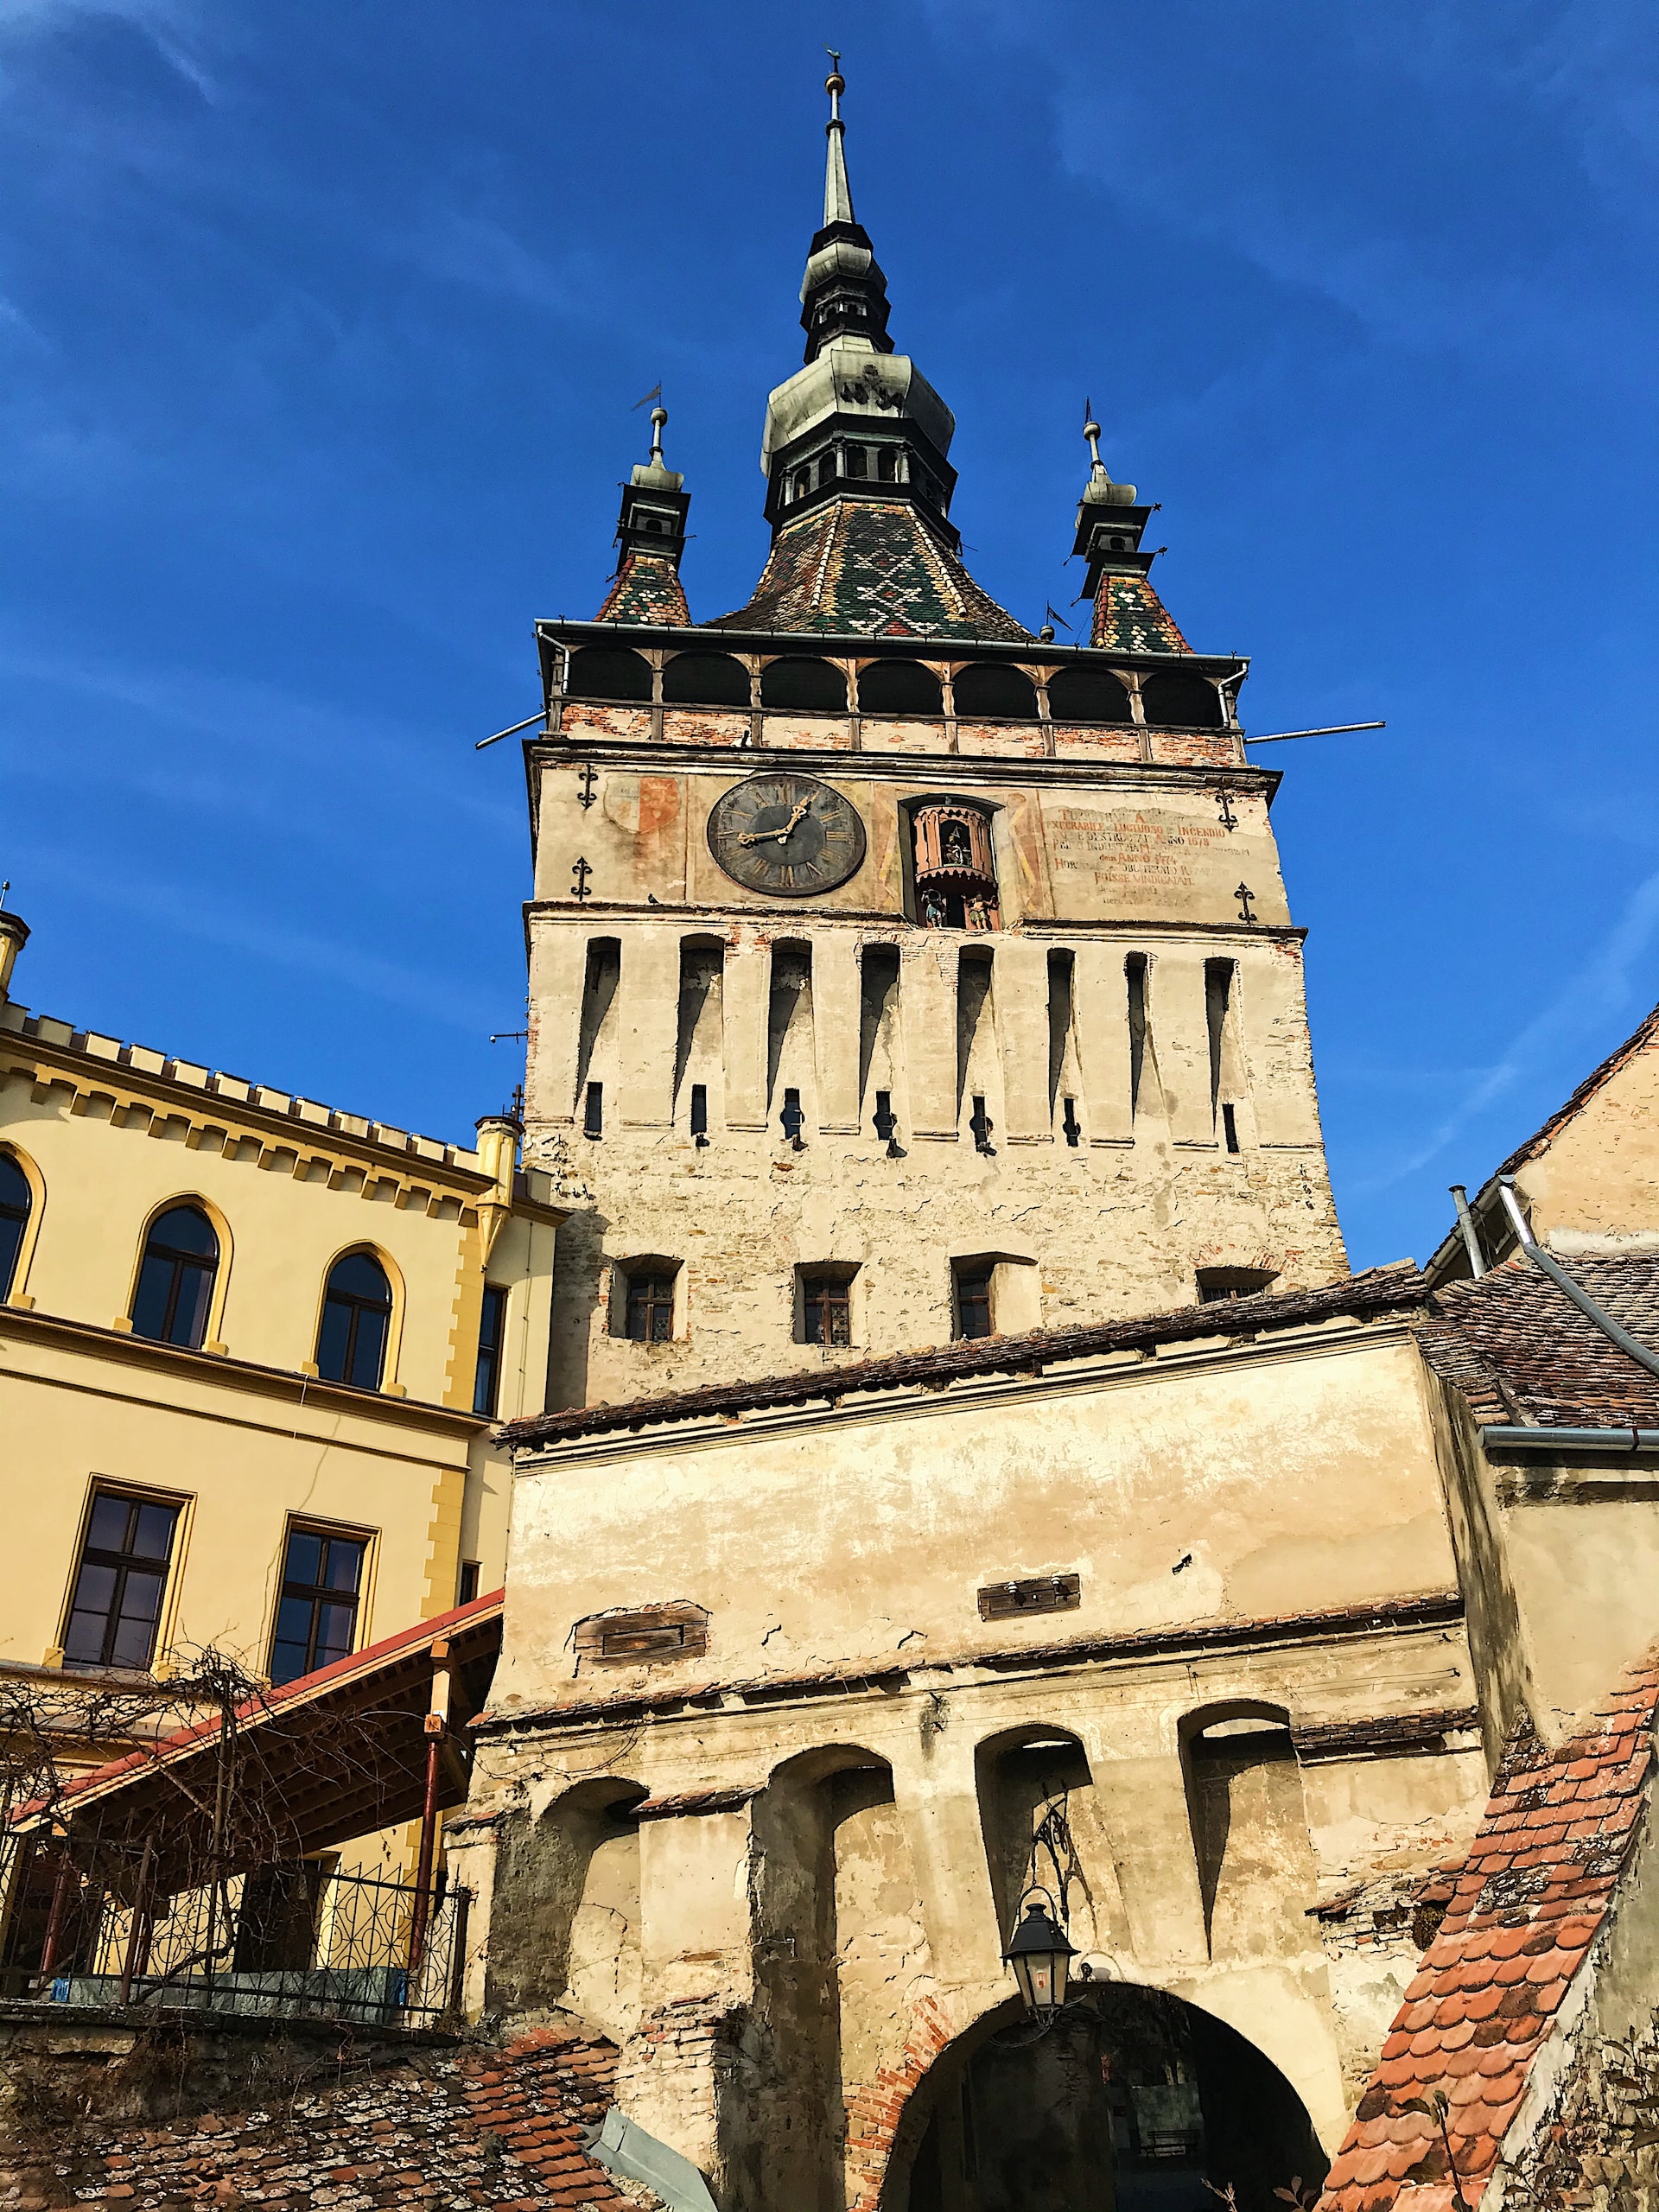 The Clock Tower in Sighisoara